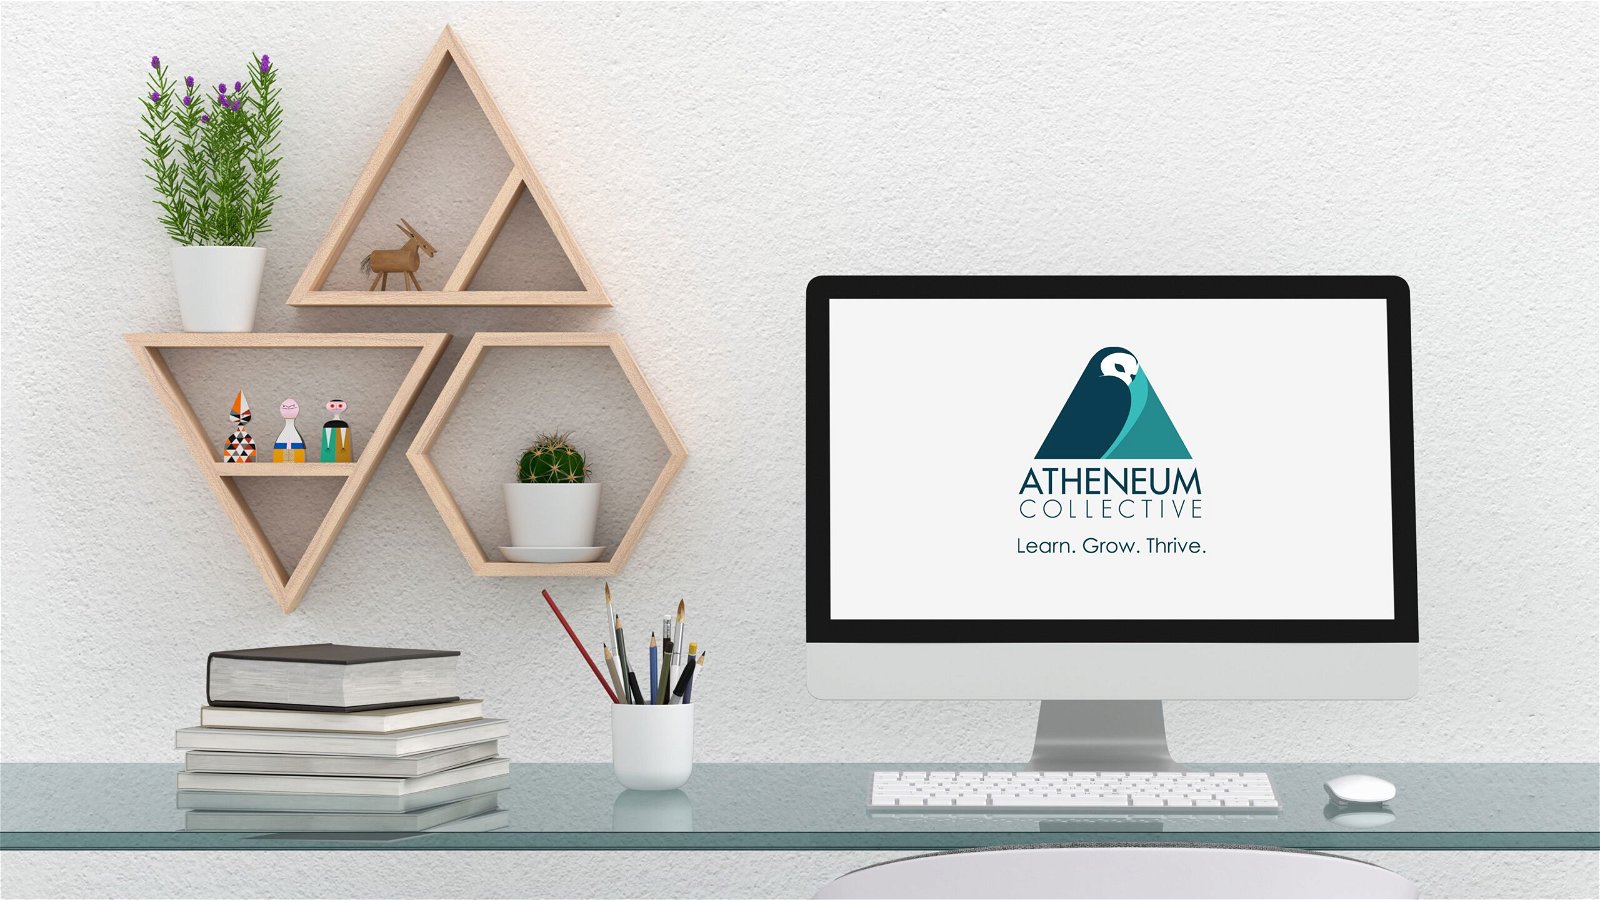 My main business:   Atheneum Collective